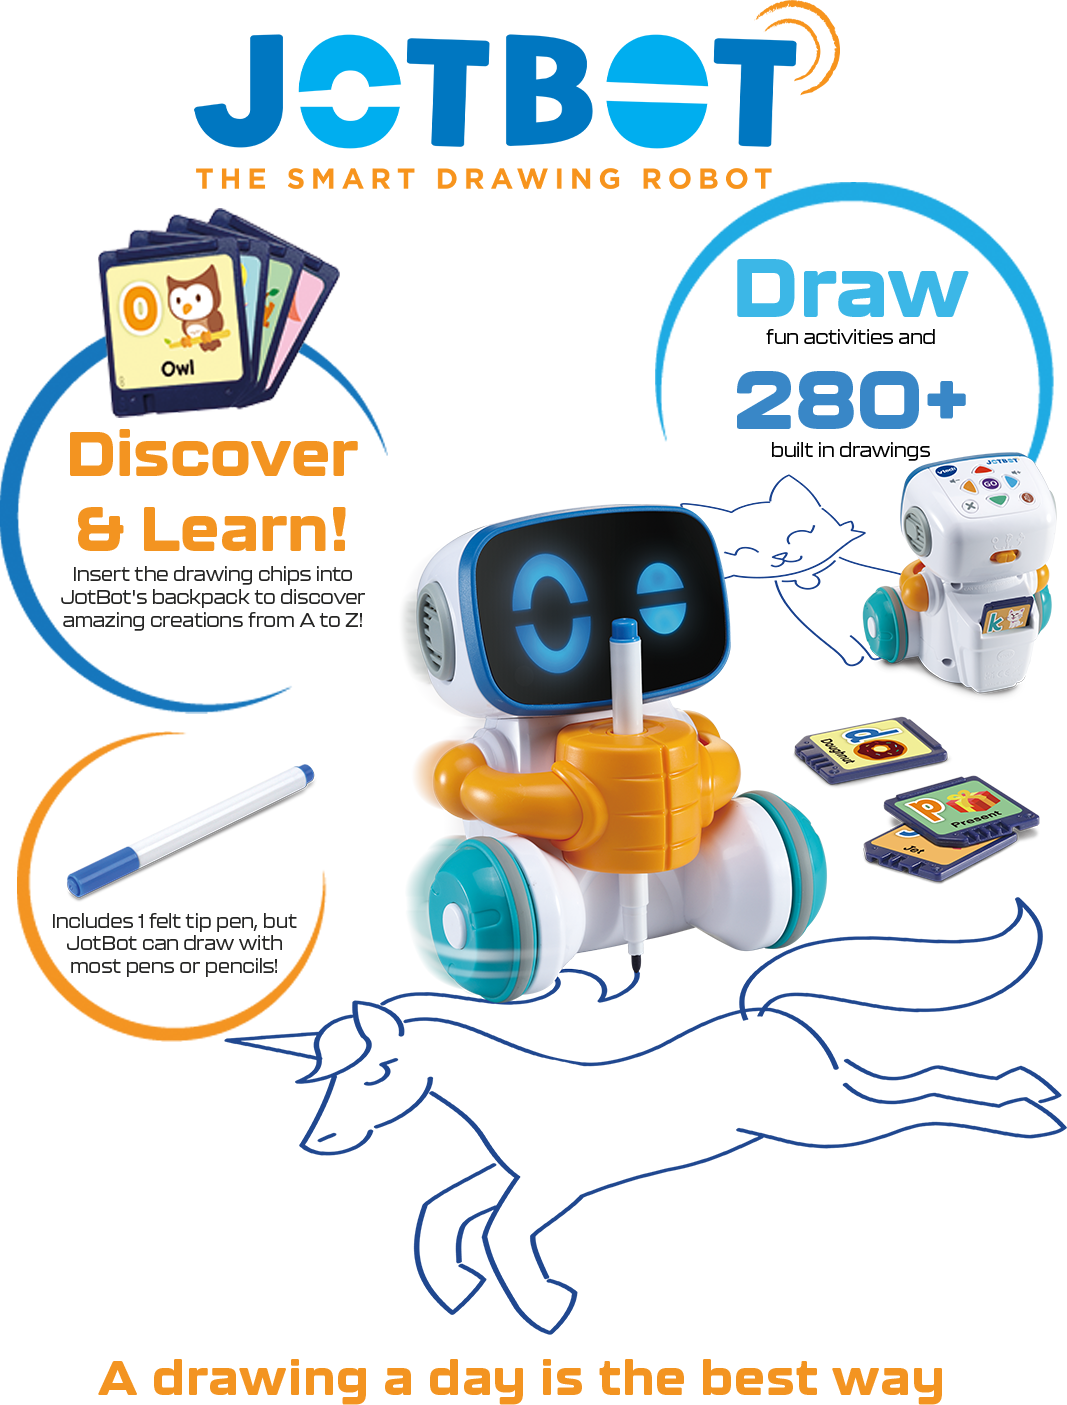 JotBot - The Smart Drawing robot, Discover & Learn!, Insert the drawing chips into JotBot's backpack to discover amazing creations from A to Z!, Draw fun activities and 280+ built in drawings, Includes 1 felt tip pen, but JotBot can draw with most pens or pencils!